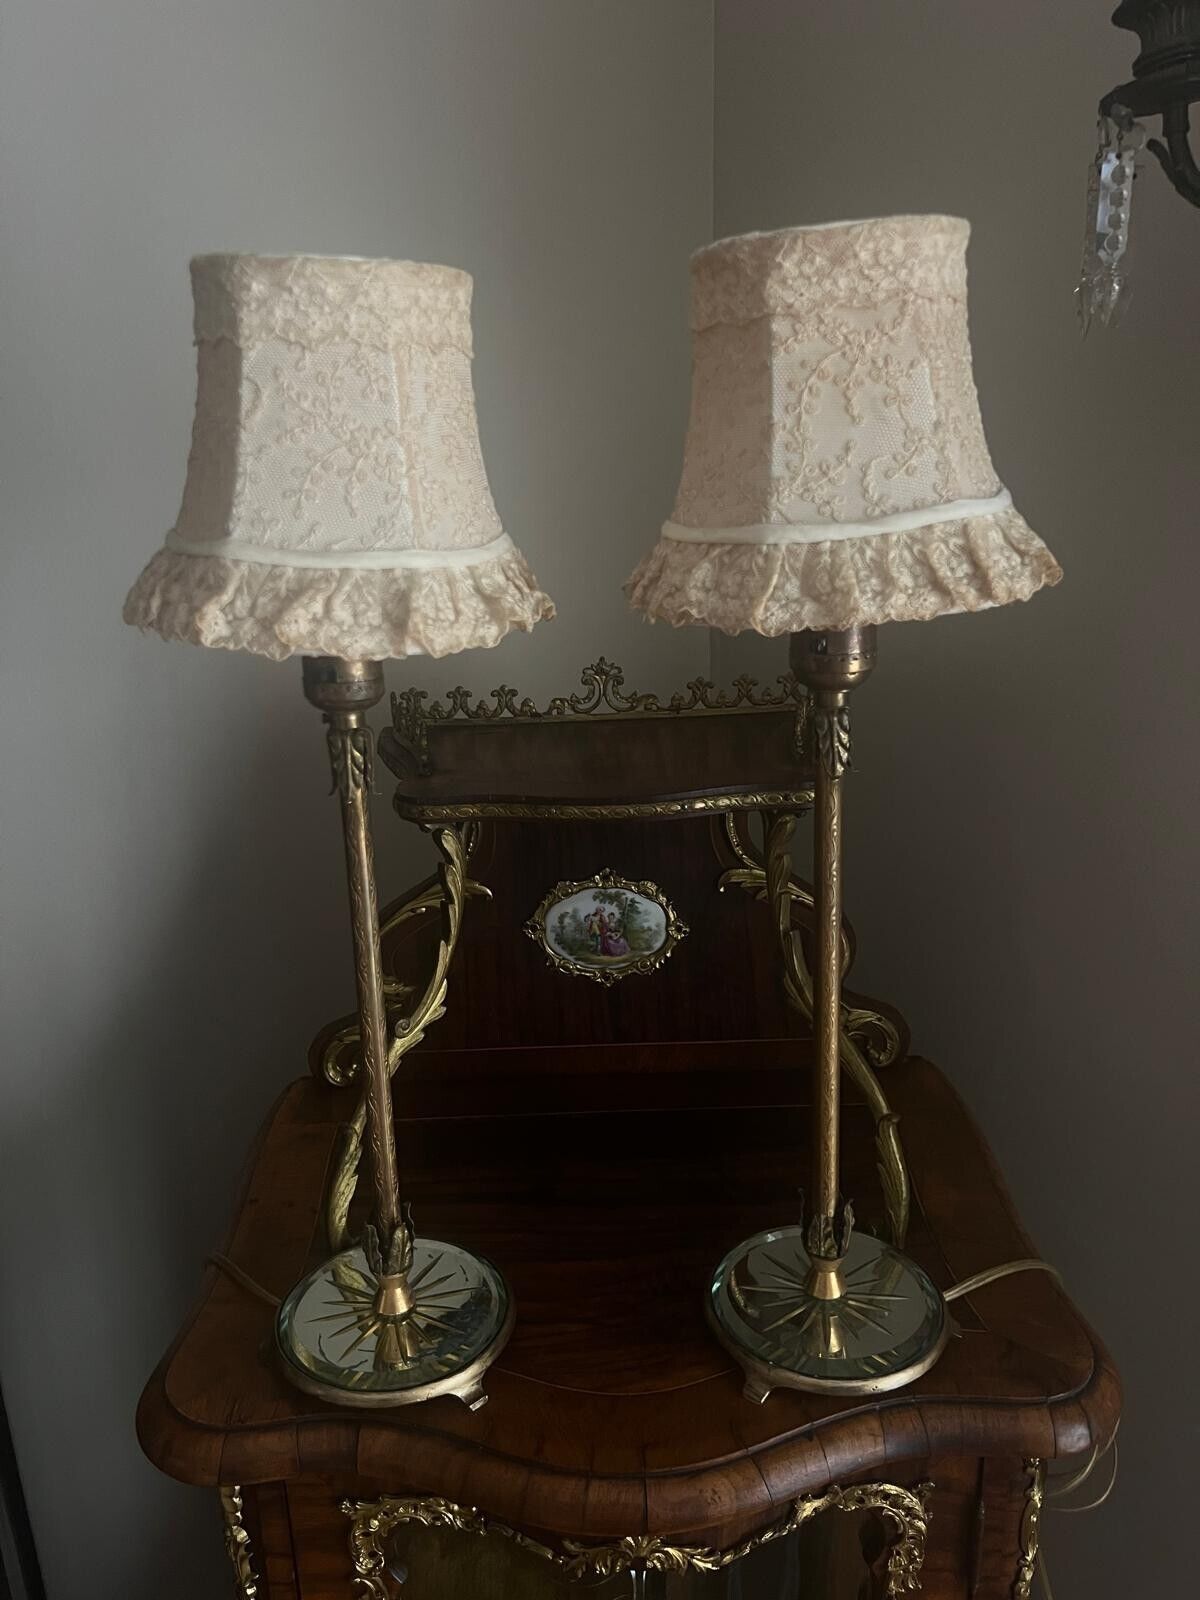 Pair of Antique Table Lamp with Boudoir Shades and Etched Mirror Bases